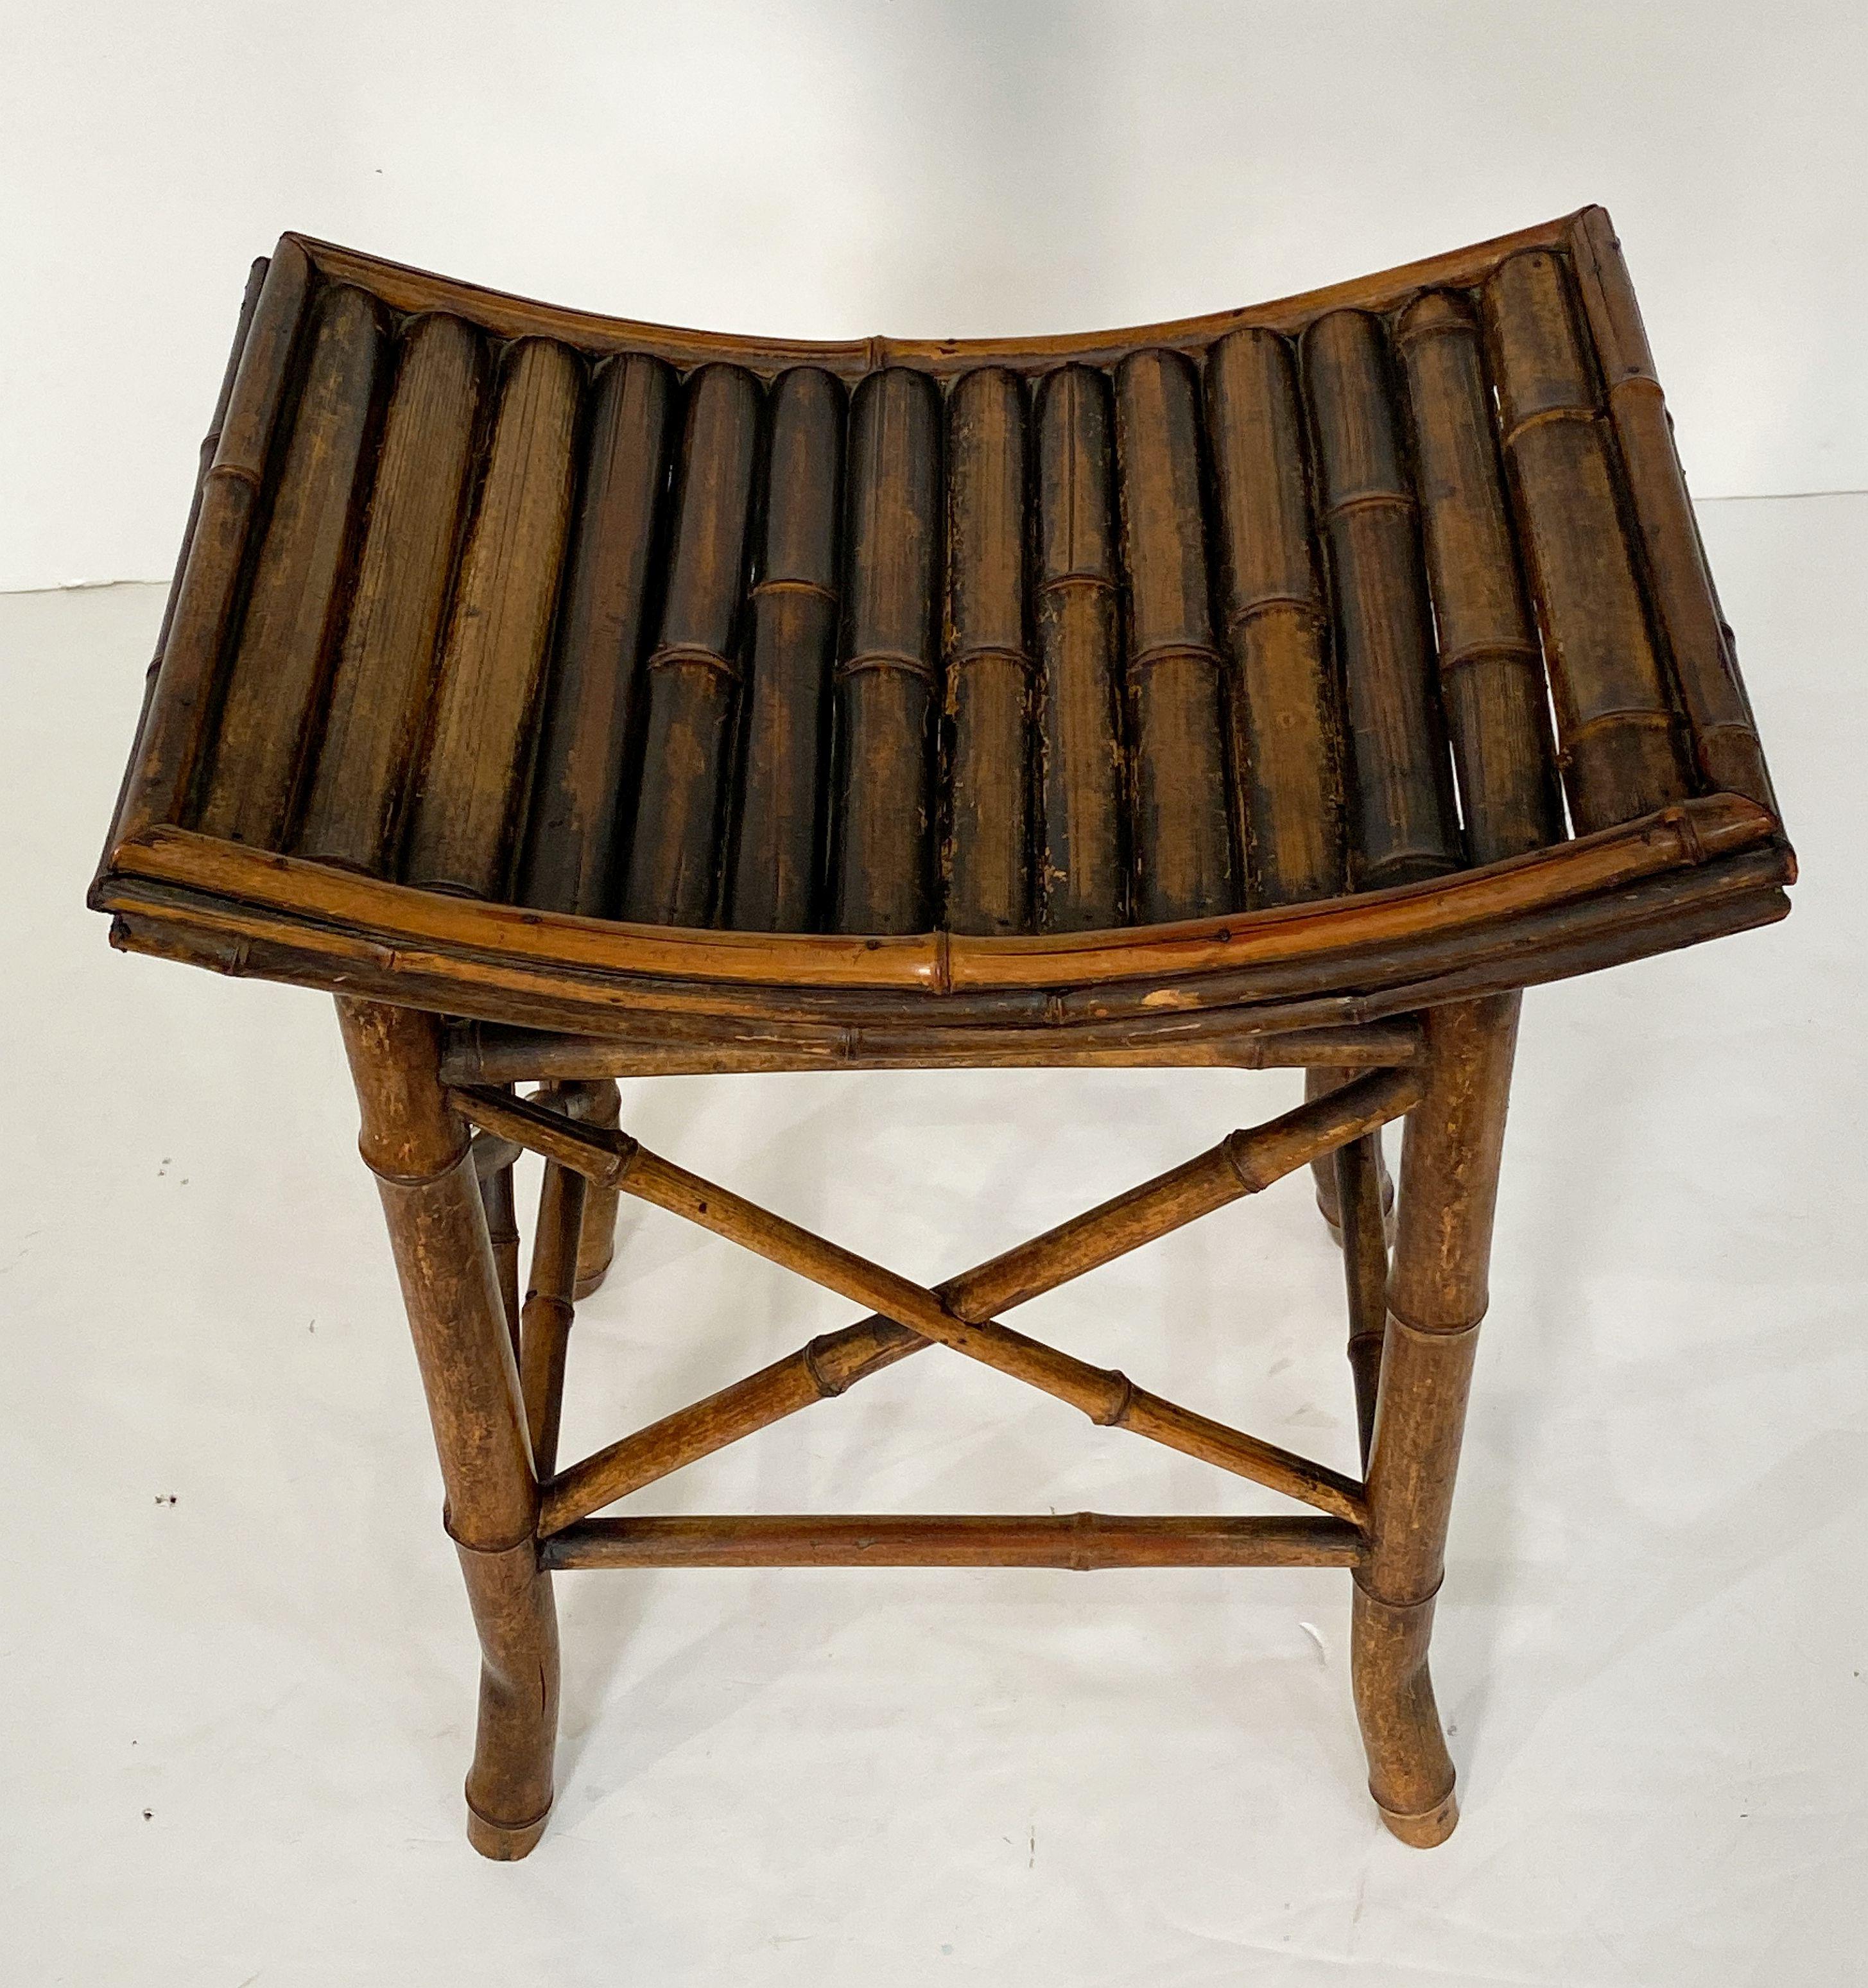 English Bamboo Bench or Stool with Saddle Seat from the Aesthetic Movement Era For Sale 5